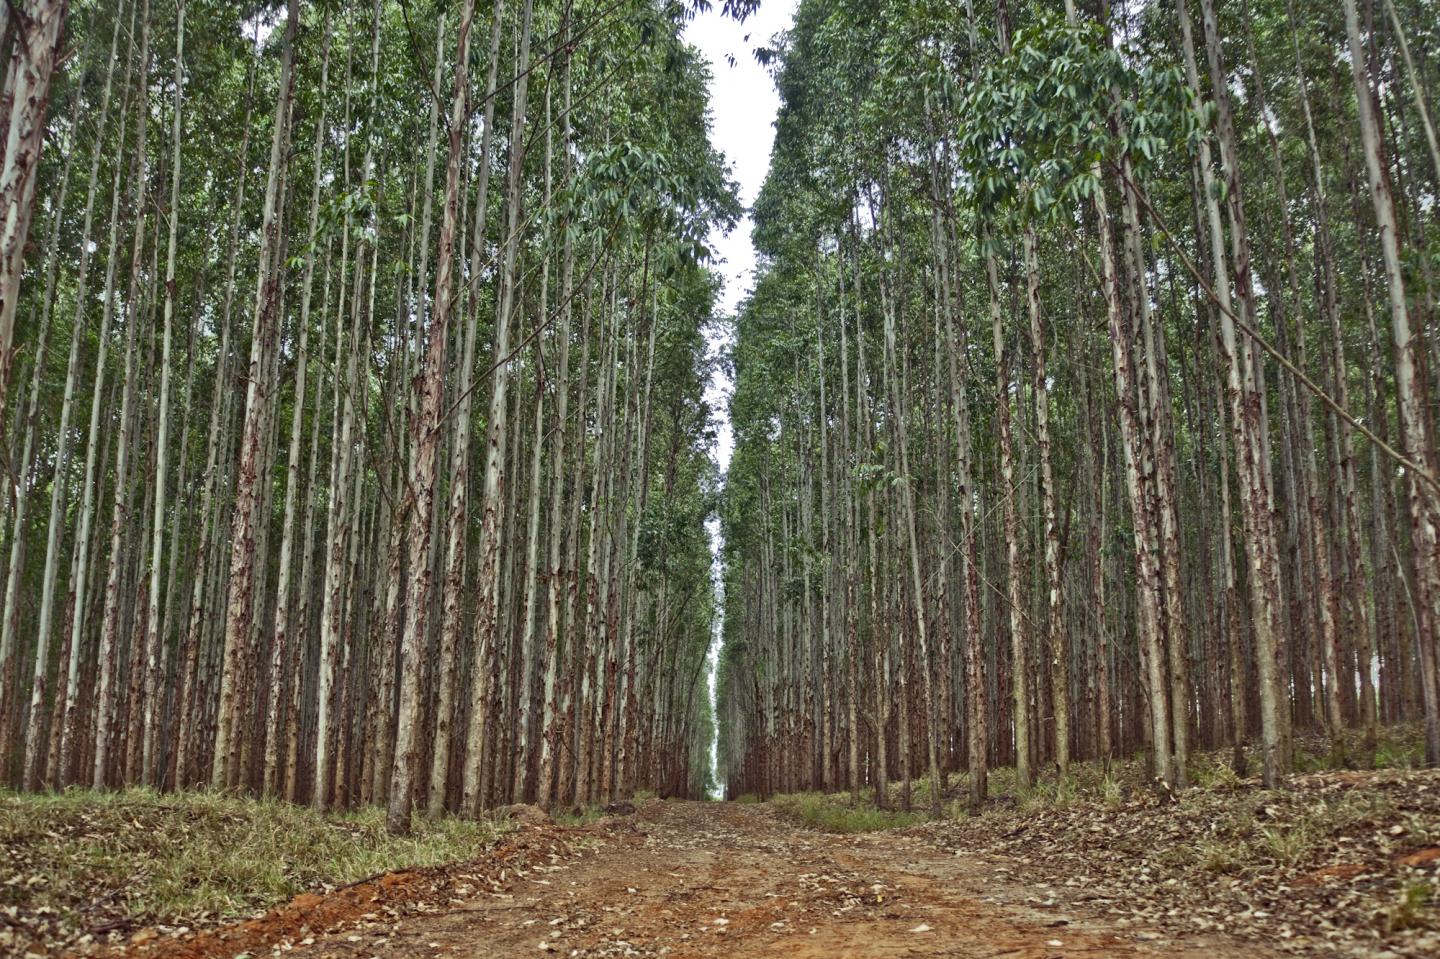 Calculating the Growth of Eucalyptus Plantations from the Cloud